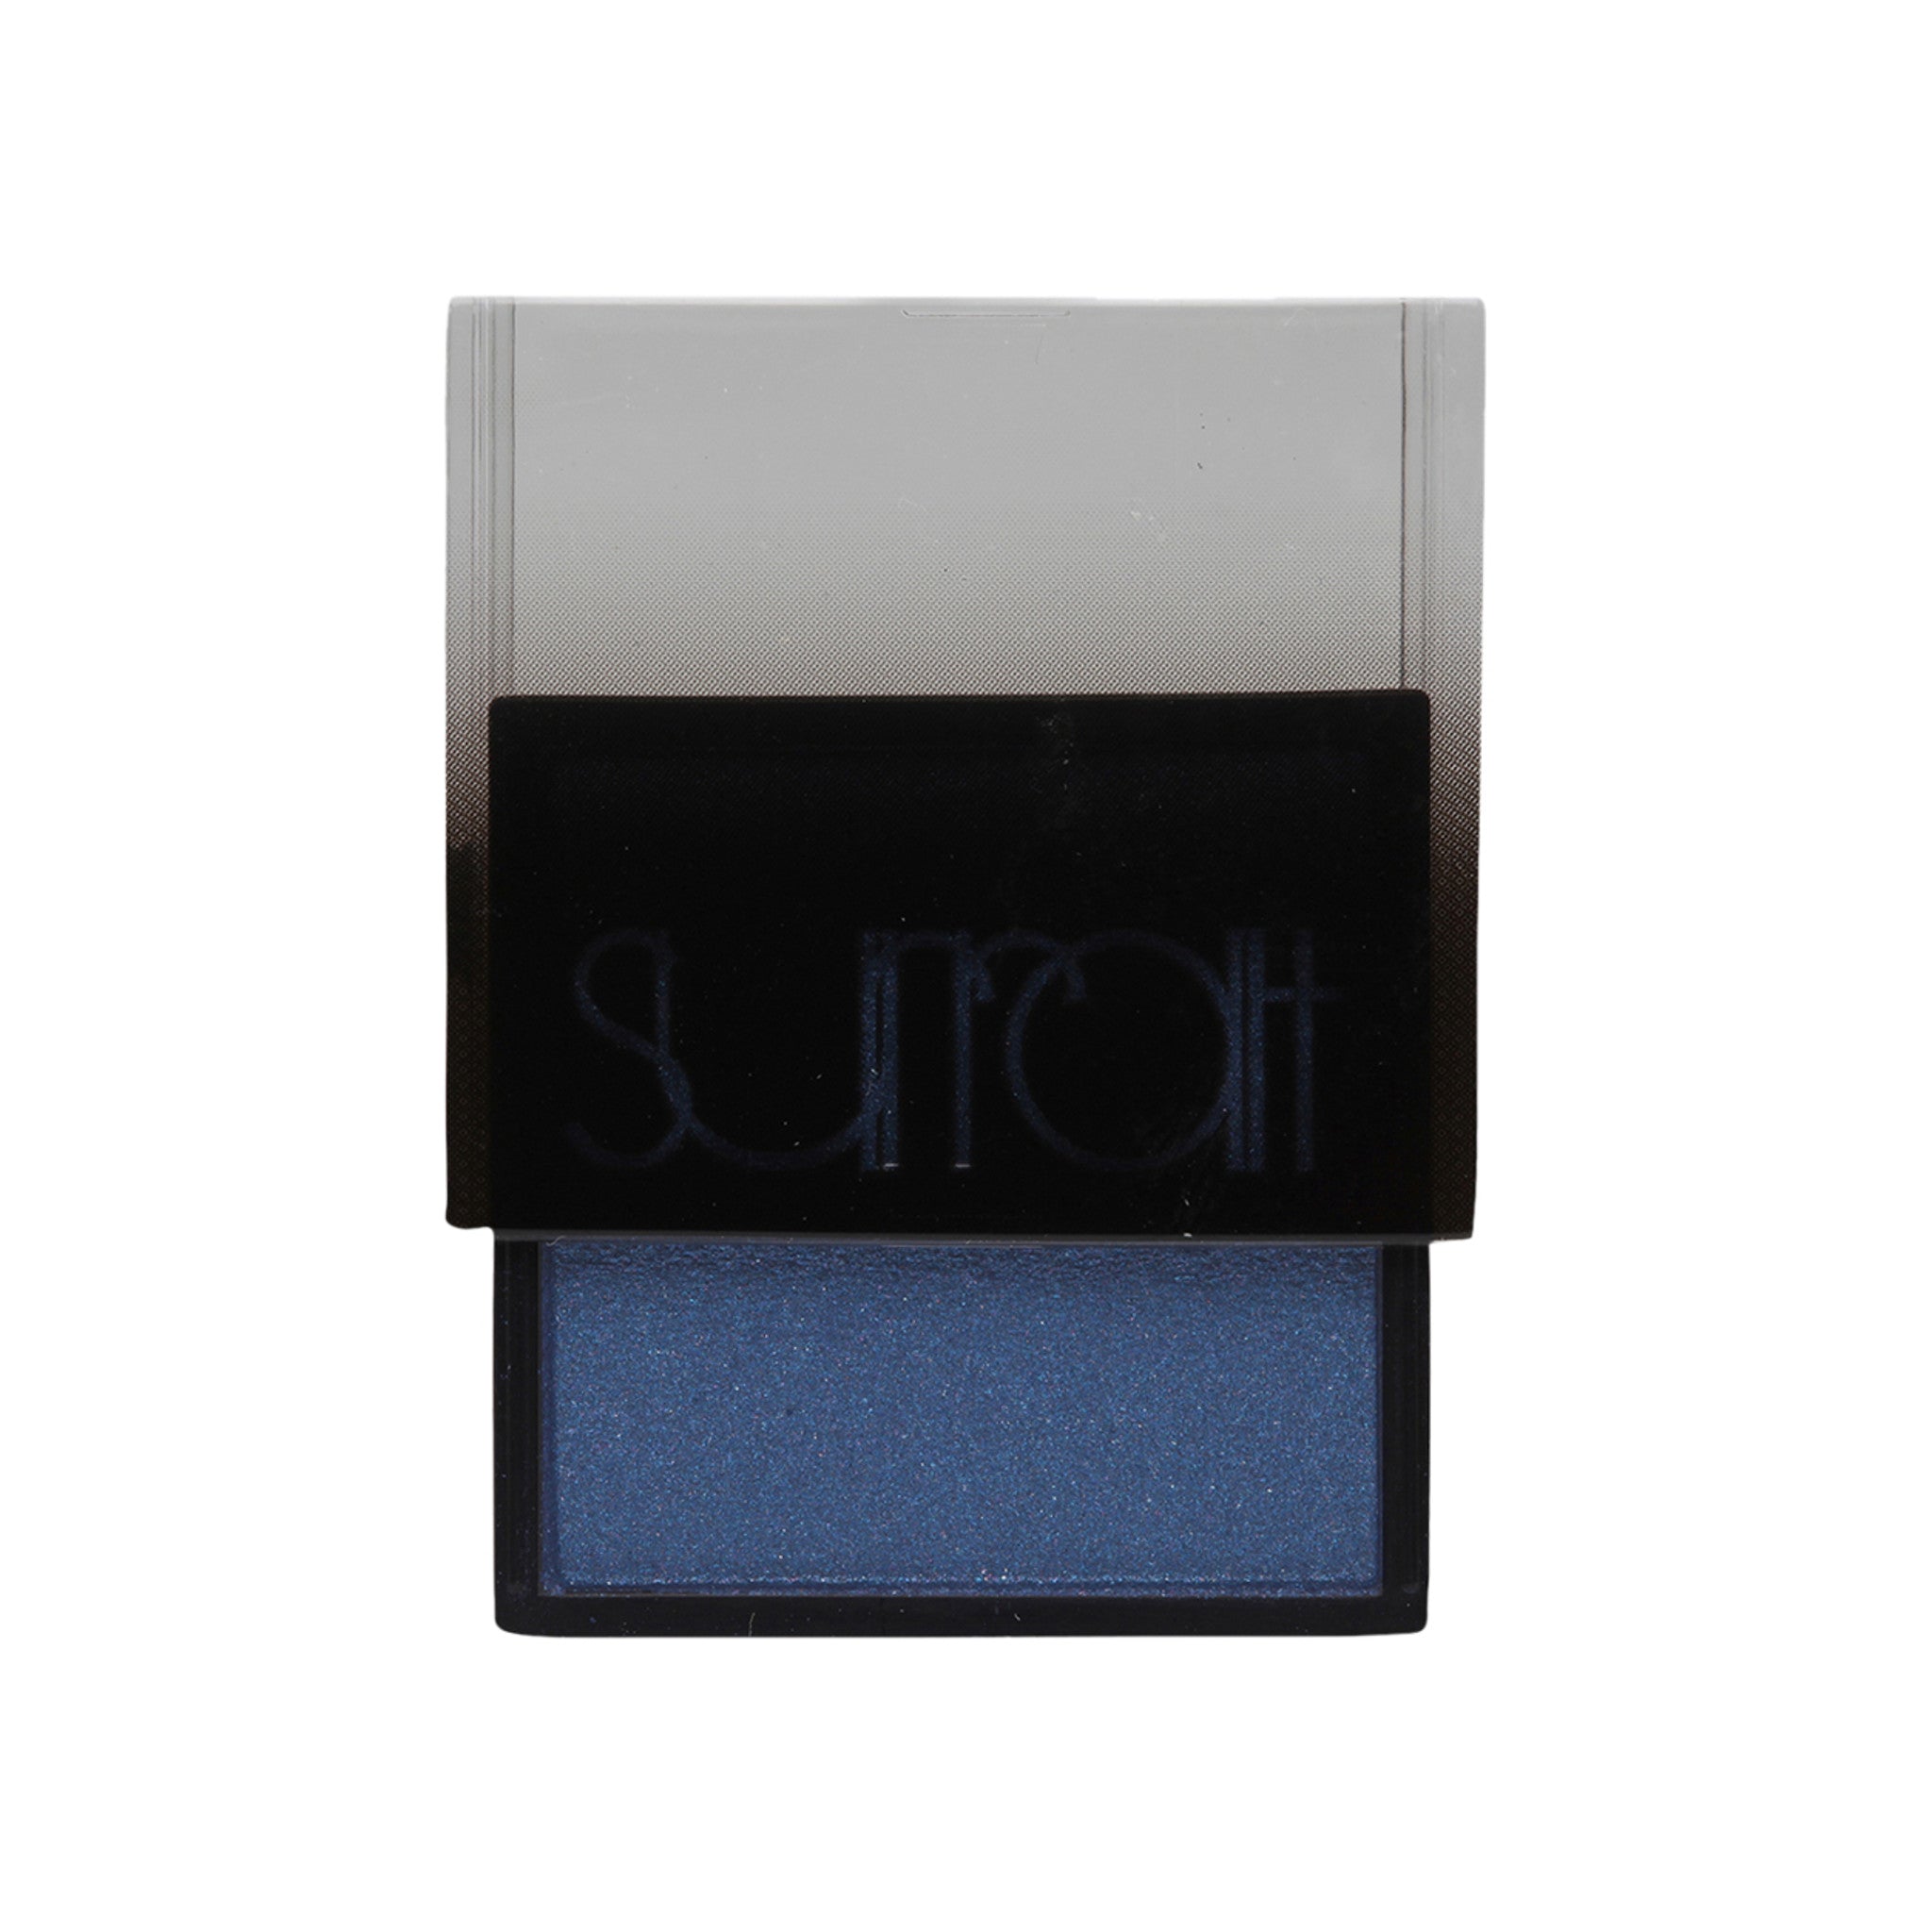 Surratt Artistique Eyeshadow Color/Shade variant: Minuit (Midnight Blue) main image. This product is in the color blue